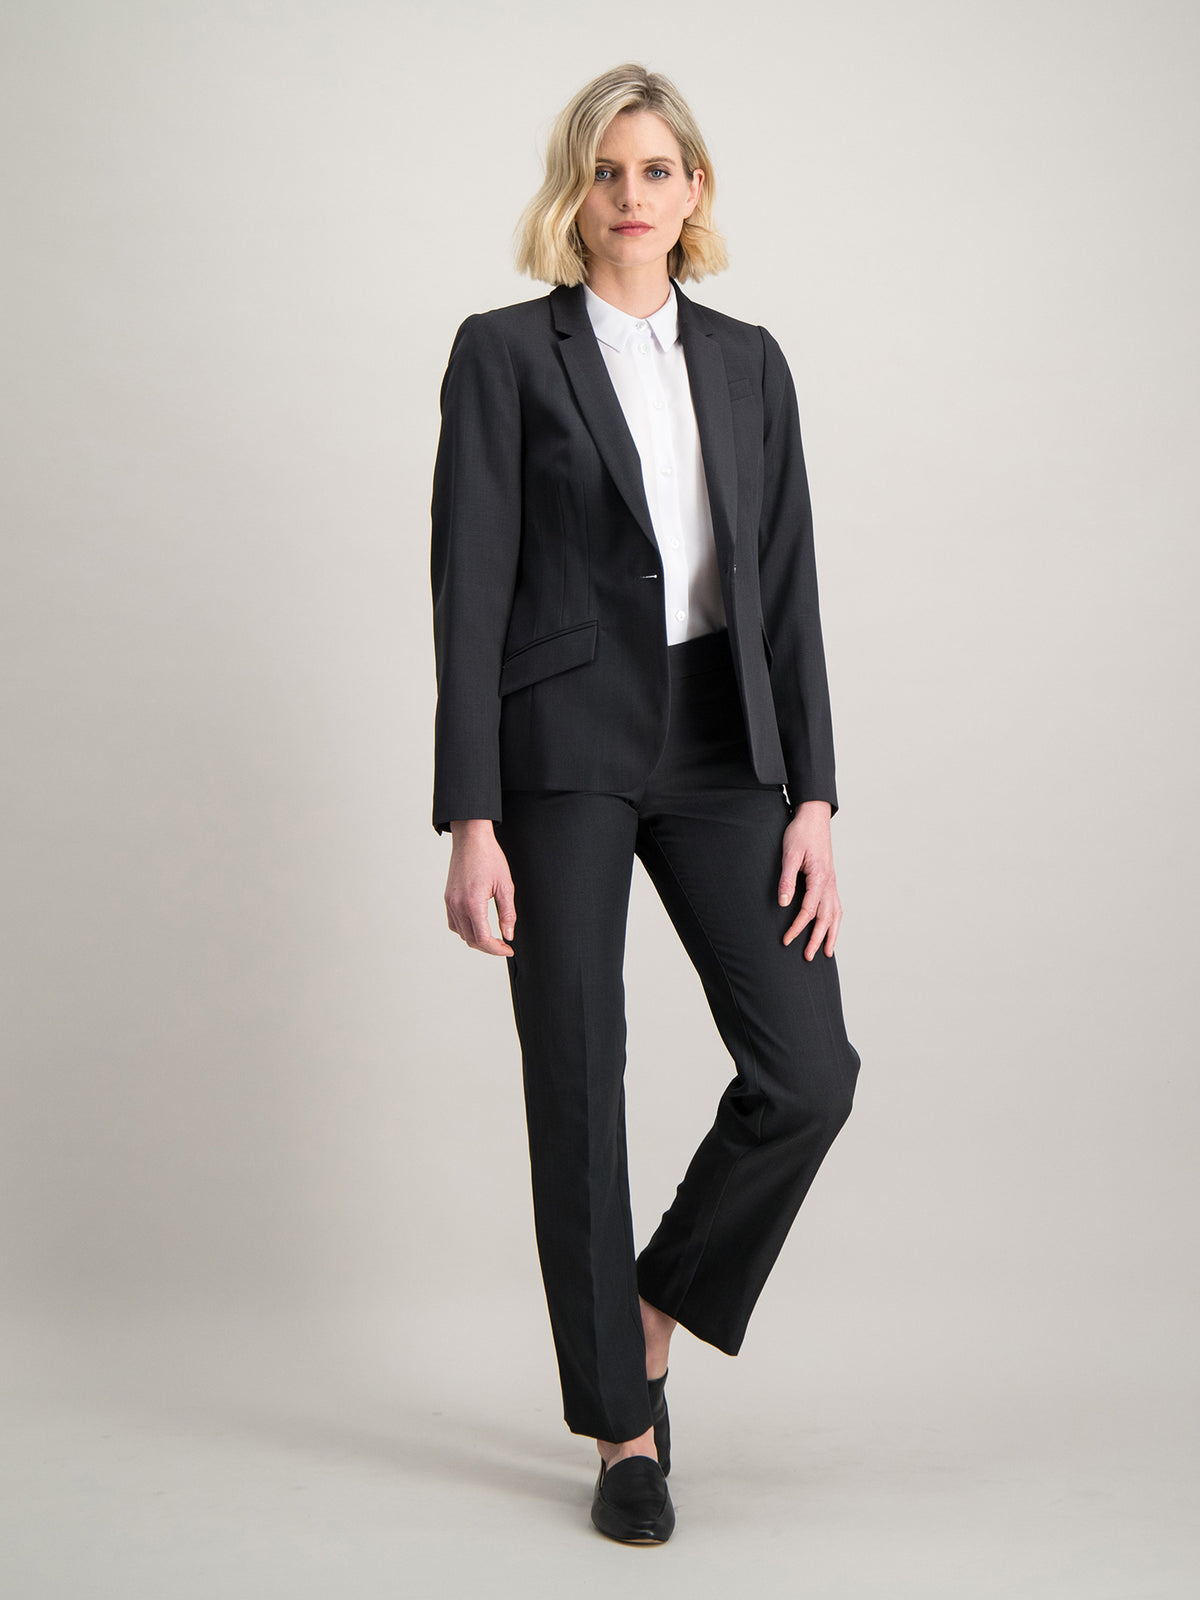 Paige fitted blazer - dark charcoal